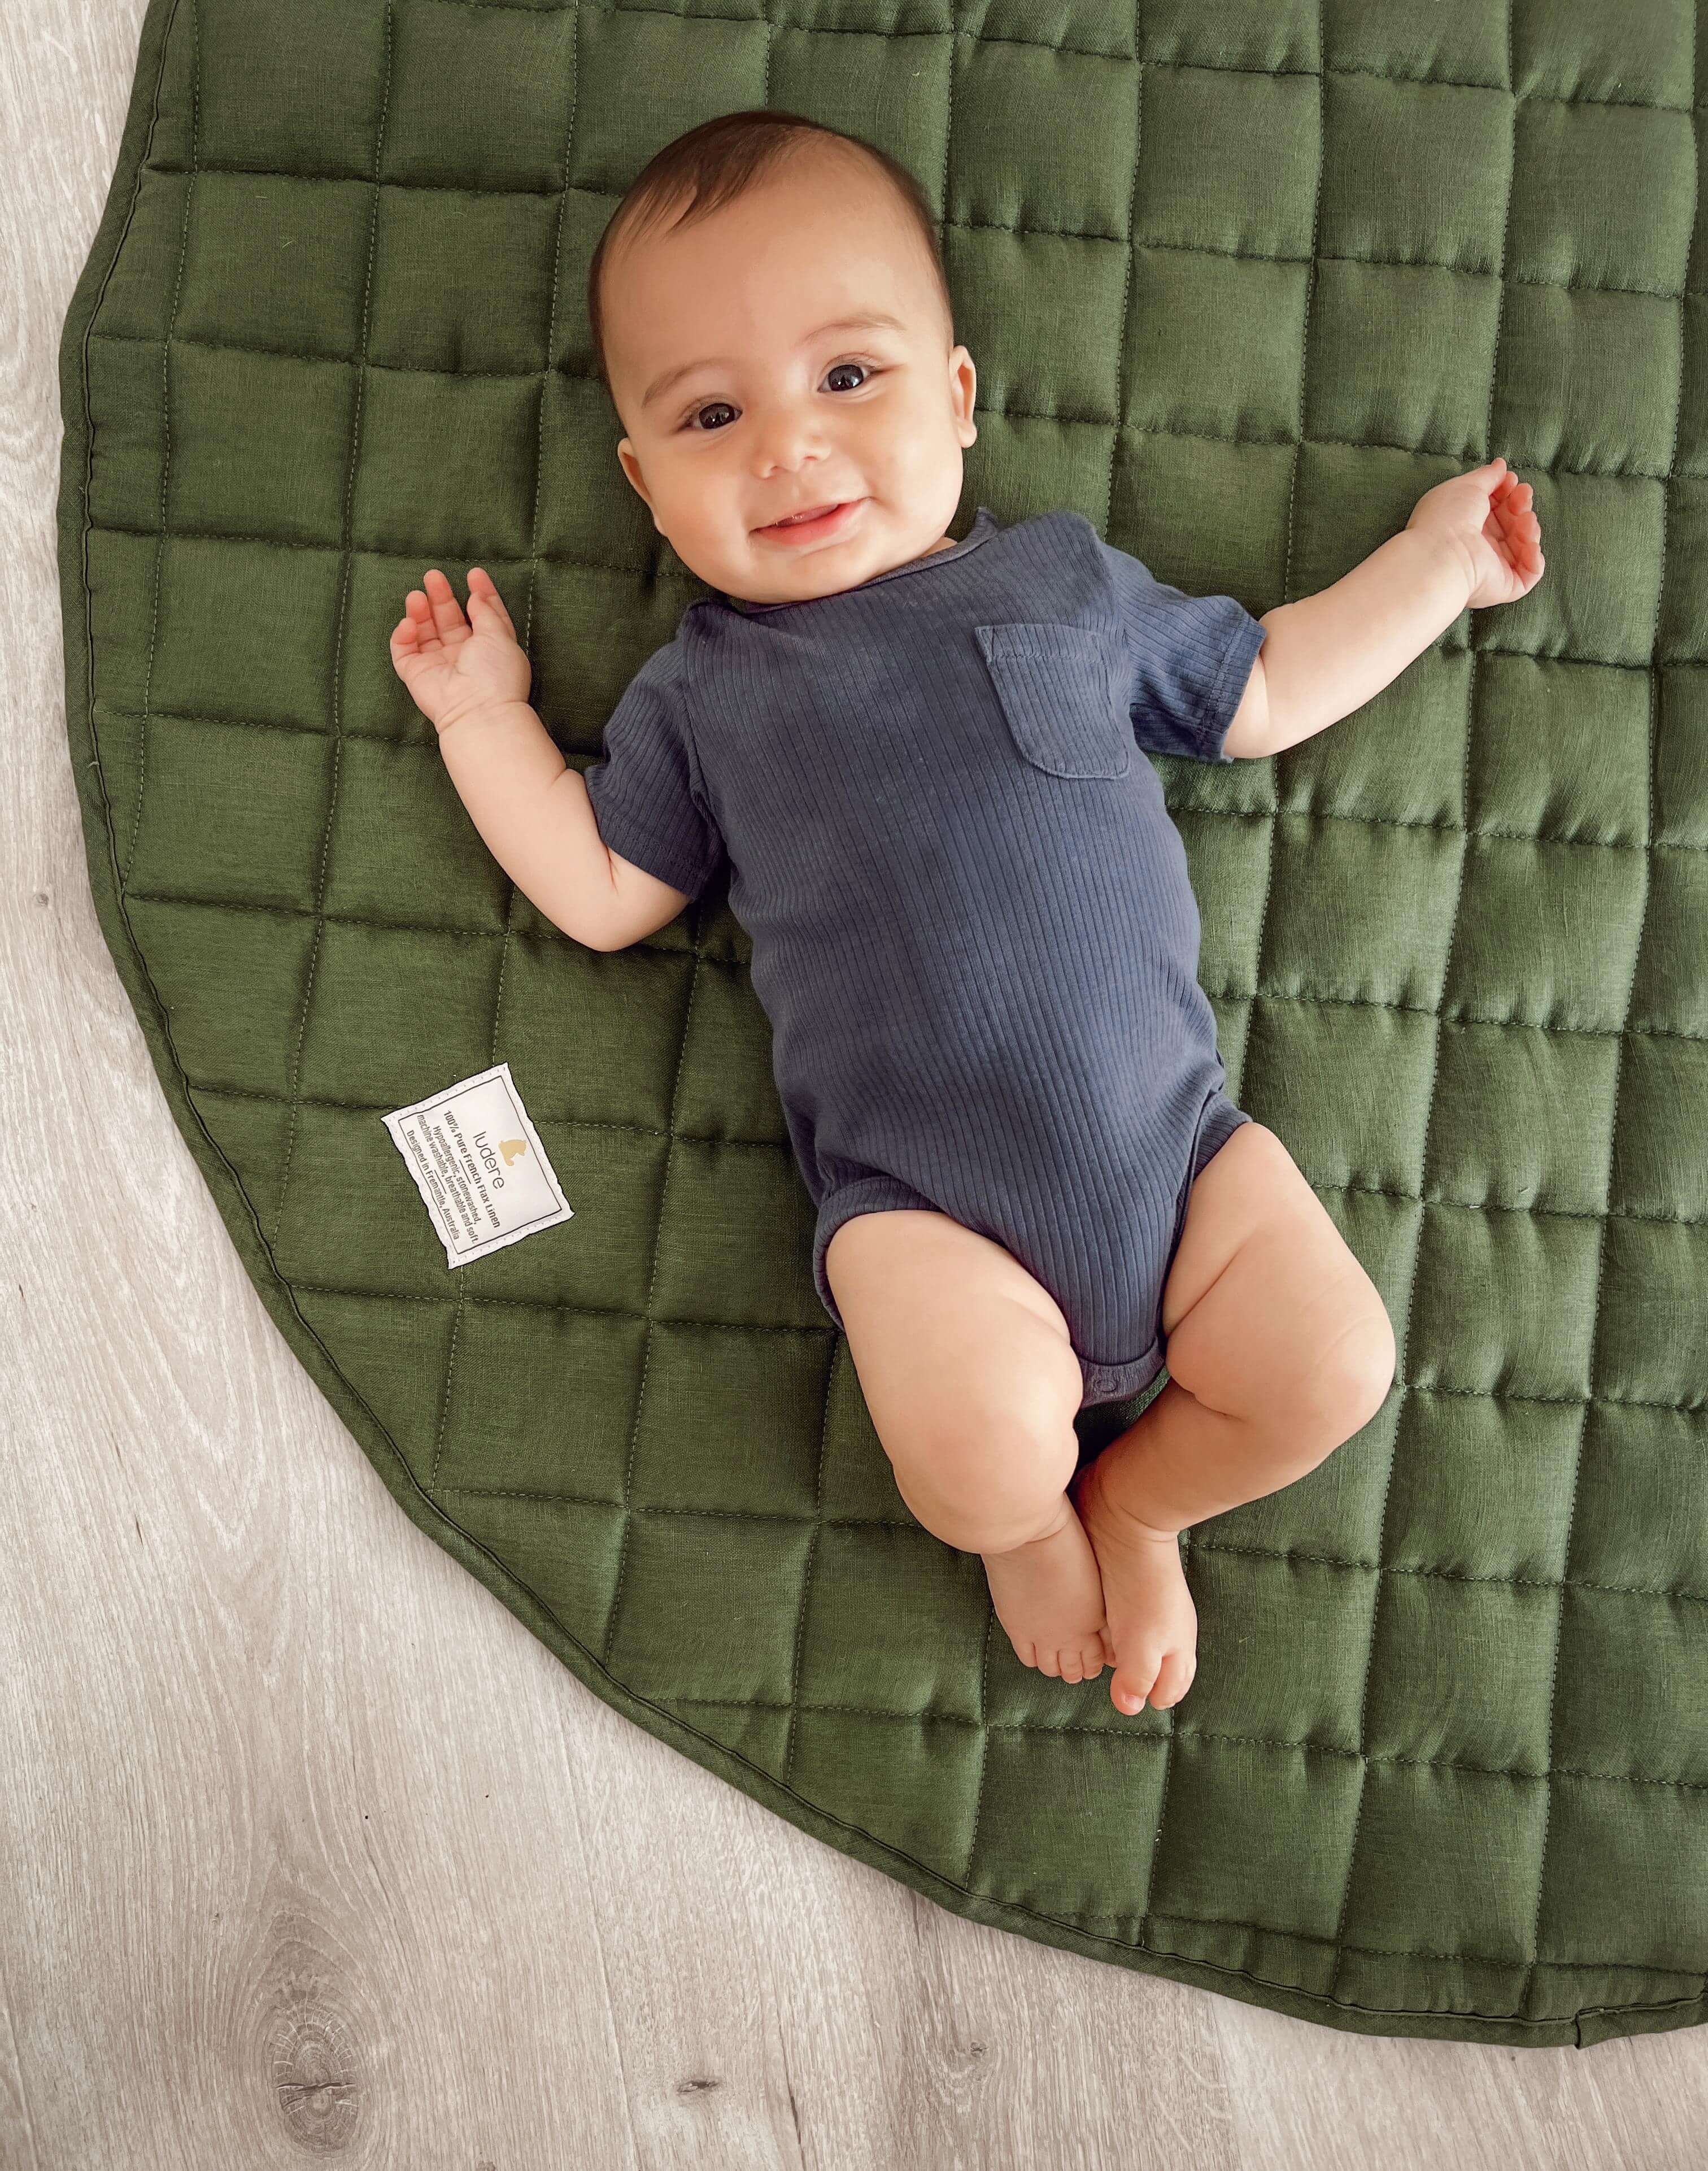 The Best Play Mats for Babies and Kids, According to Parents